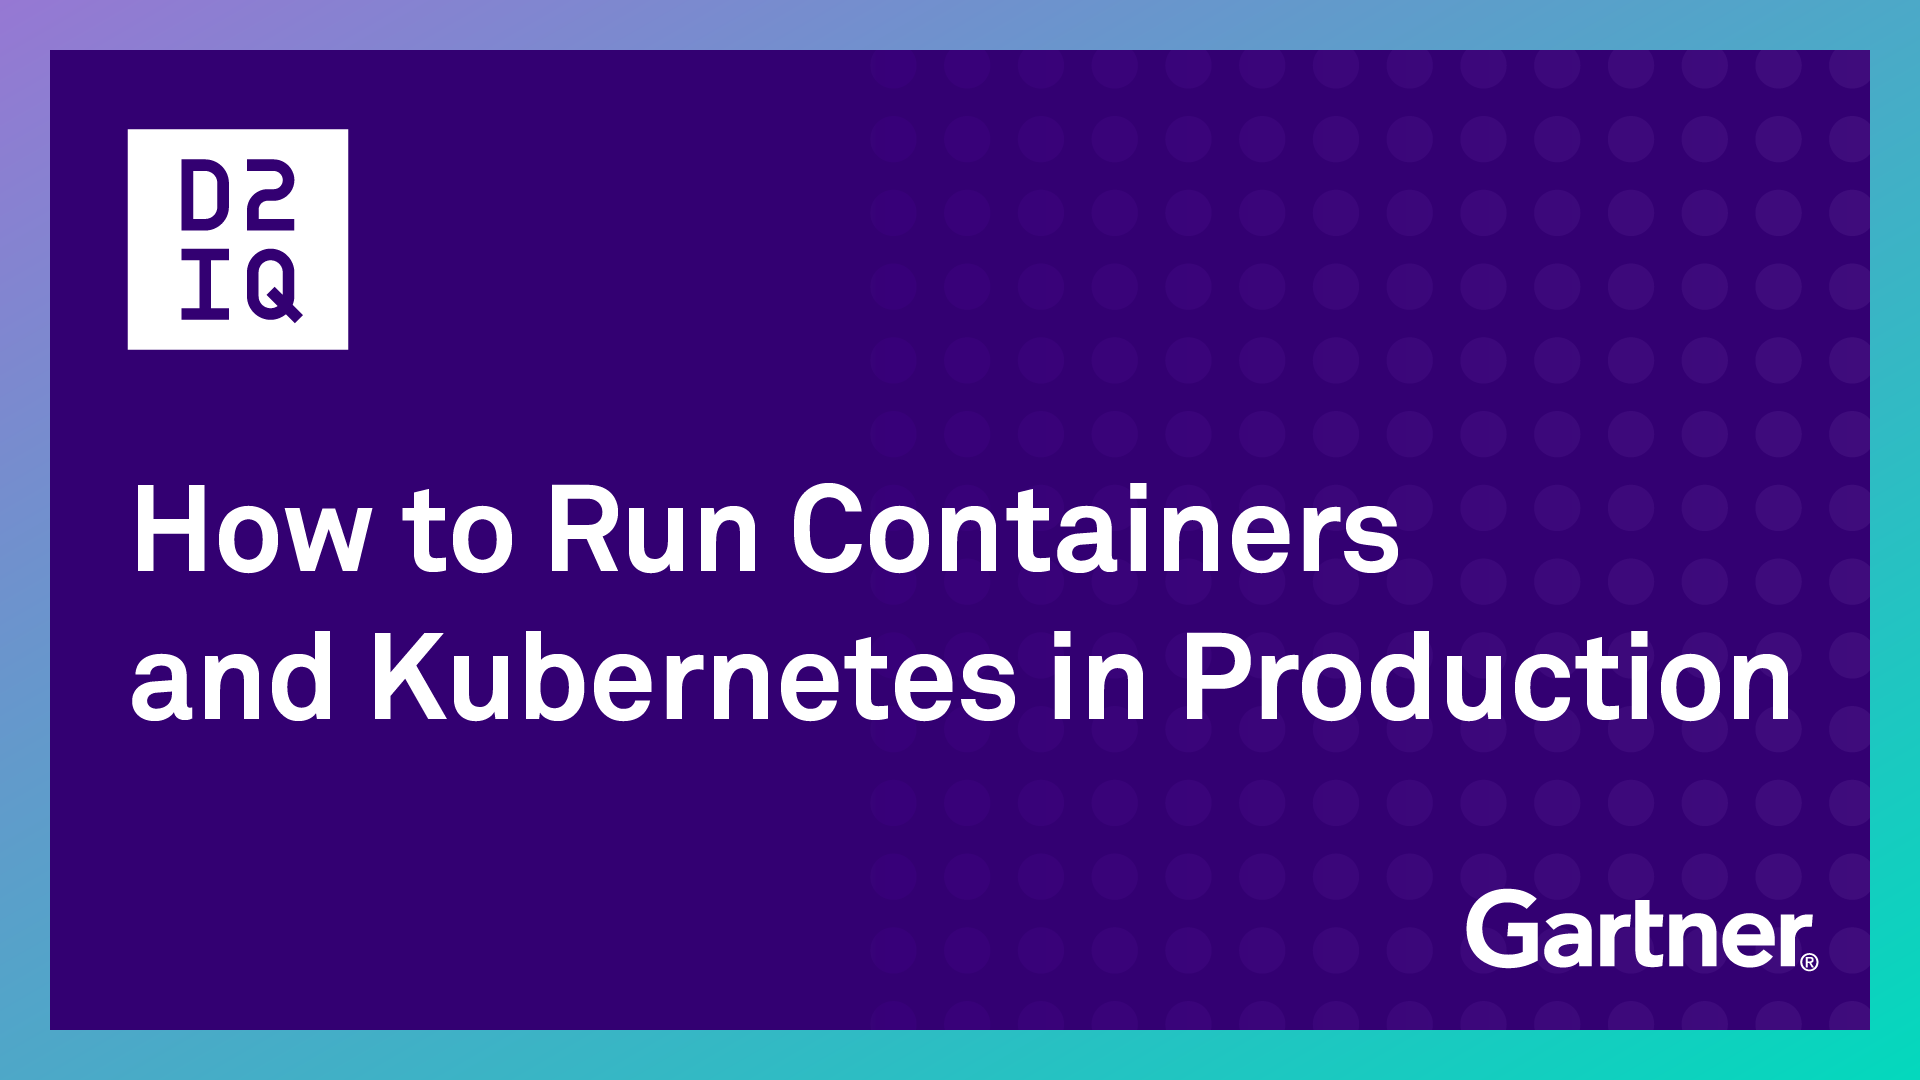 Gartner - How to Run Containers and Kubernetes in Production